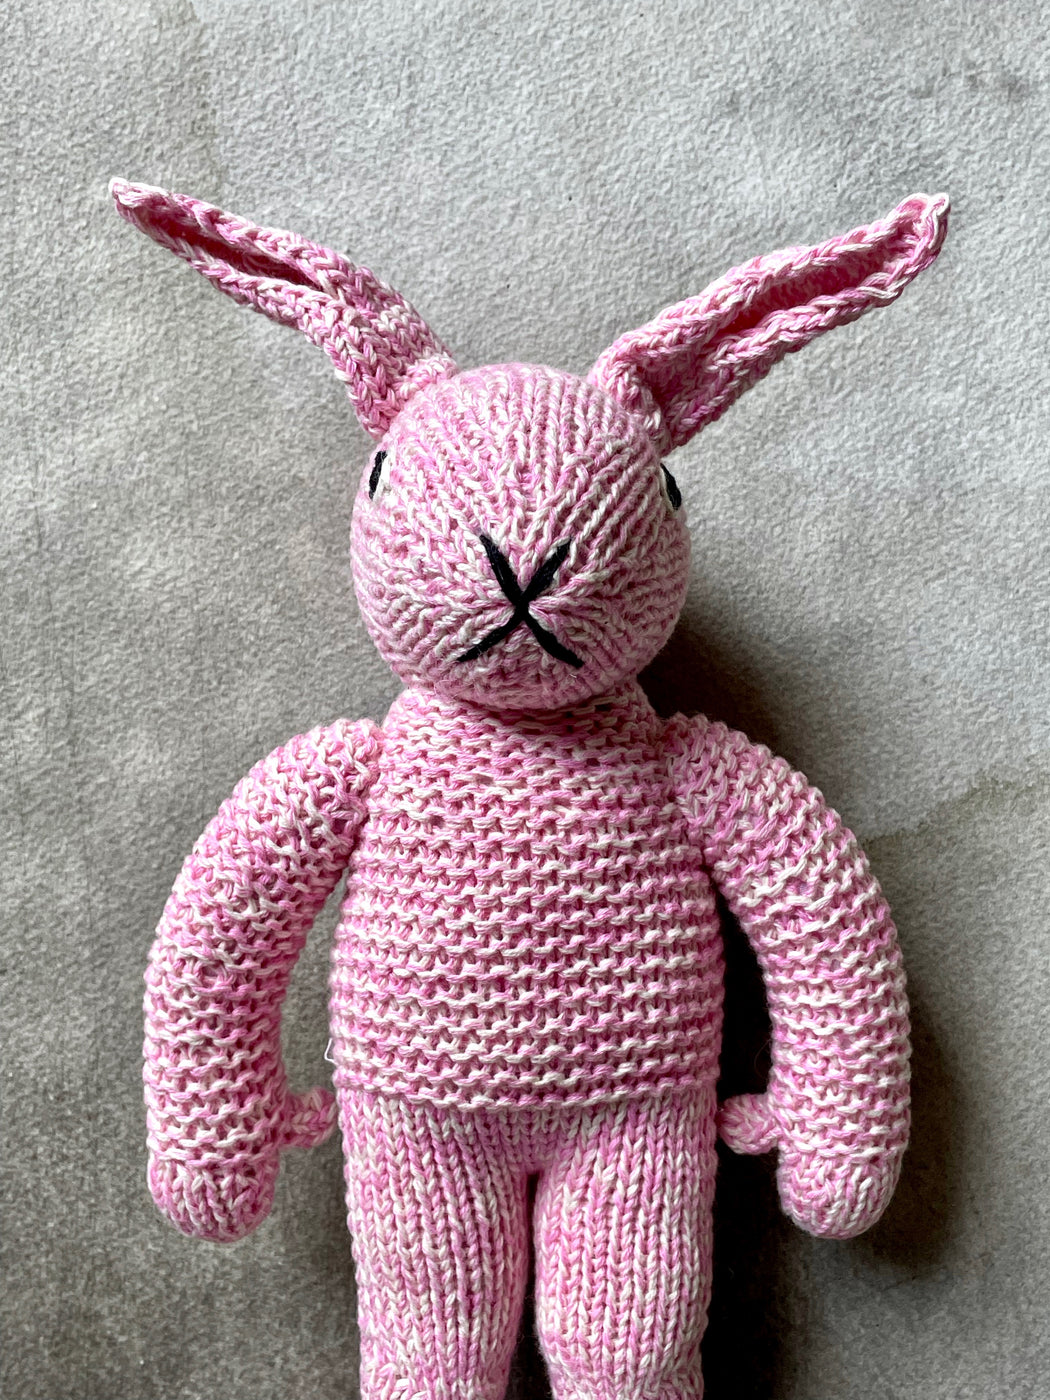 Pink "Maria the Rabbit" by Anne-Claire Petit